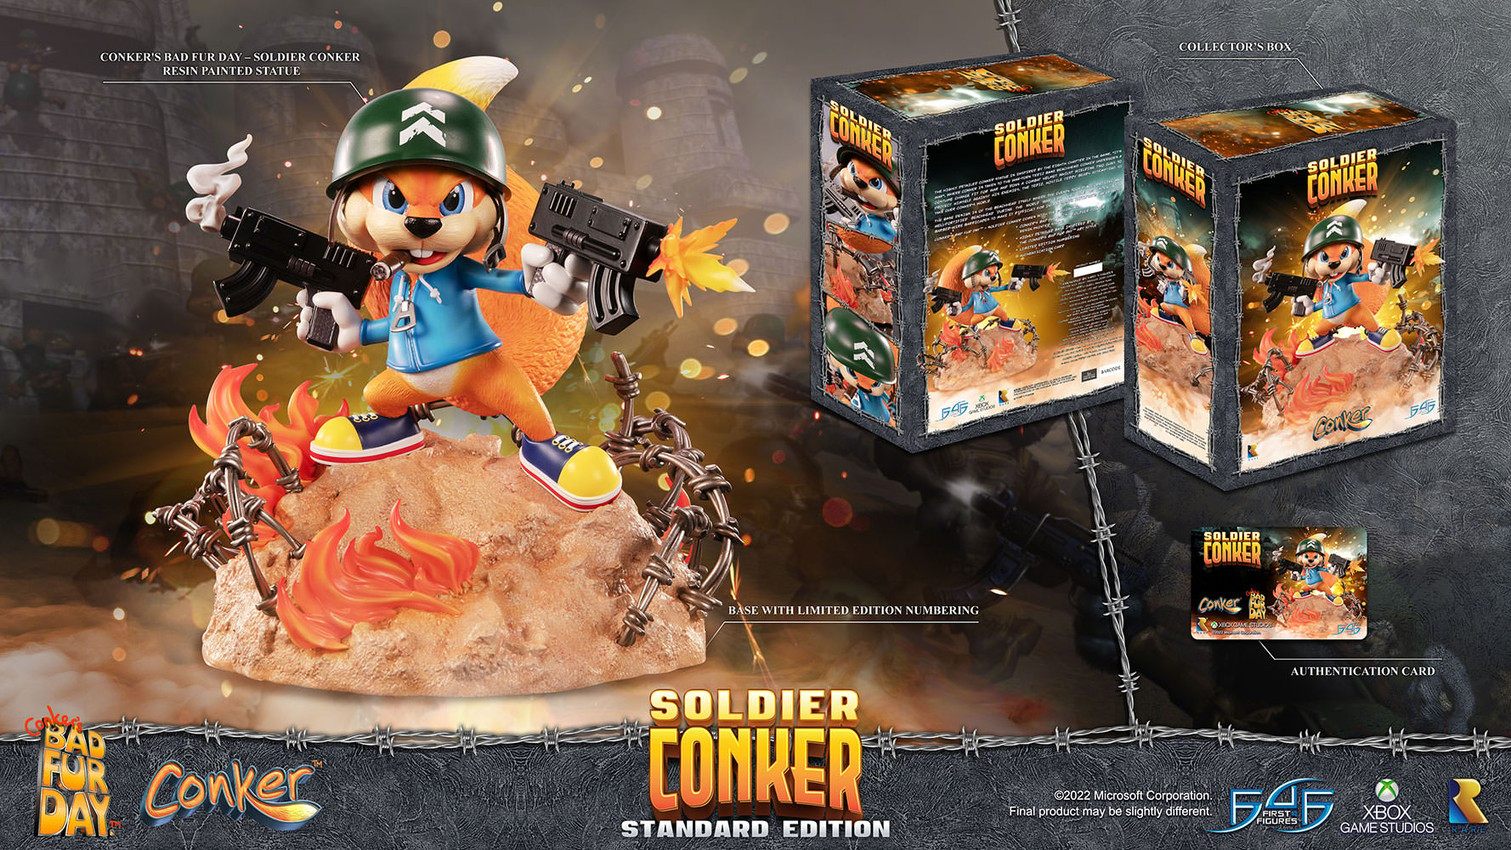 Soldier Conker (Standard Edition)- Prototype Shown